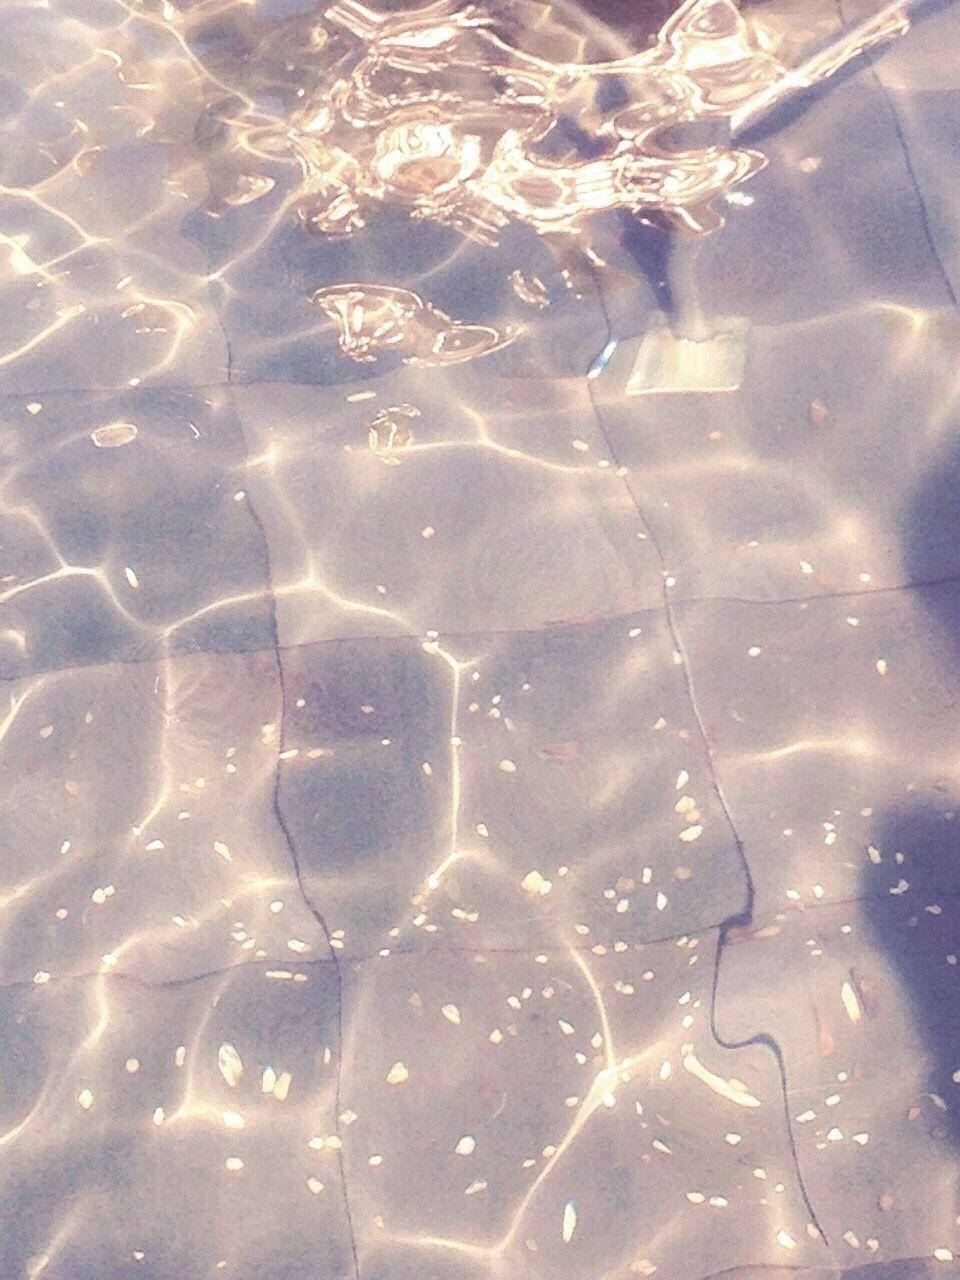 Sparkly Water Aesthetic Wallpaper